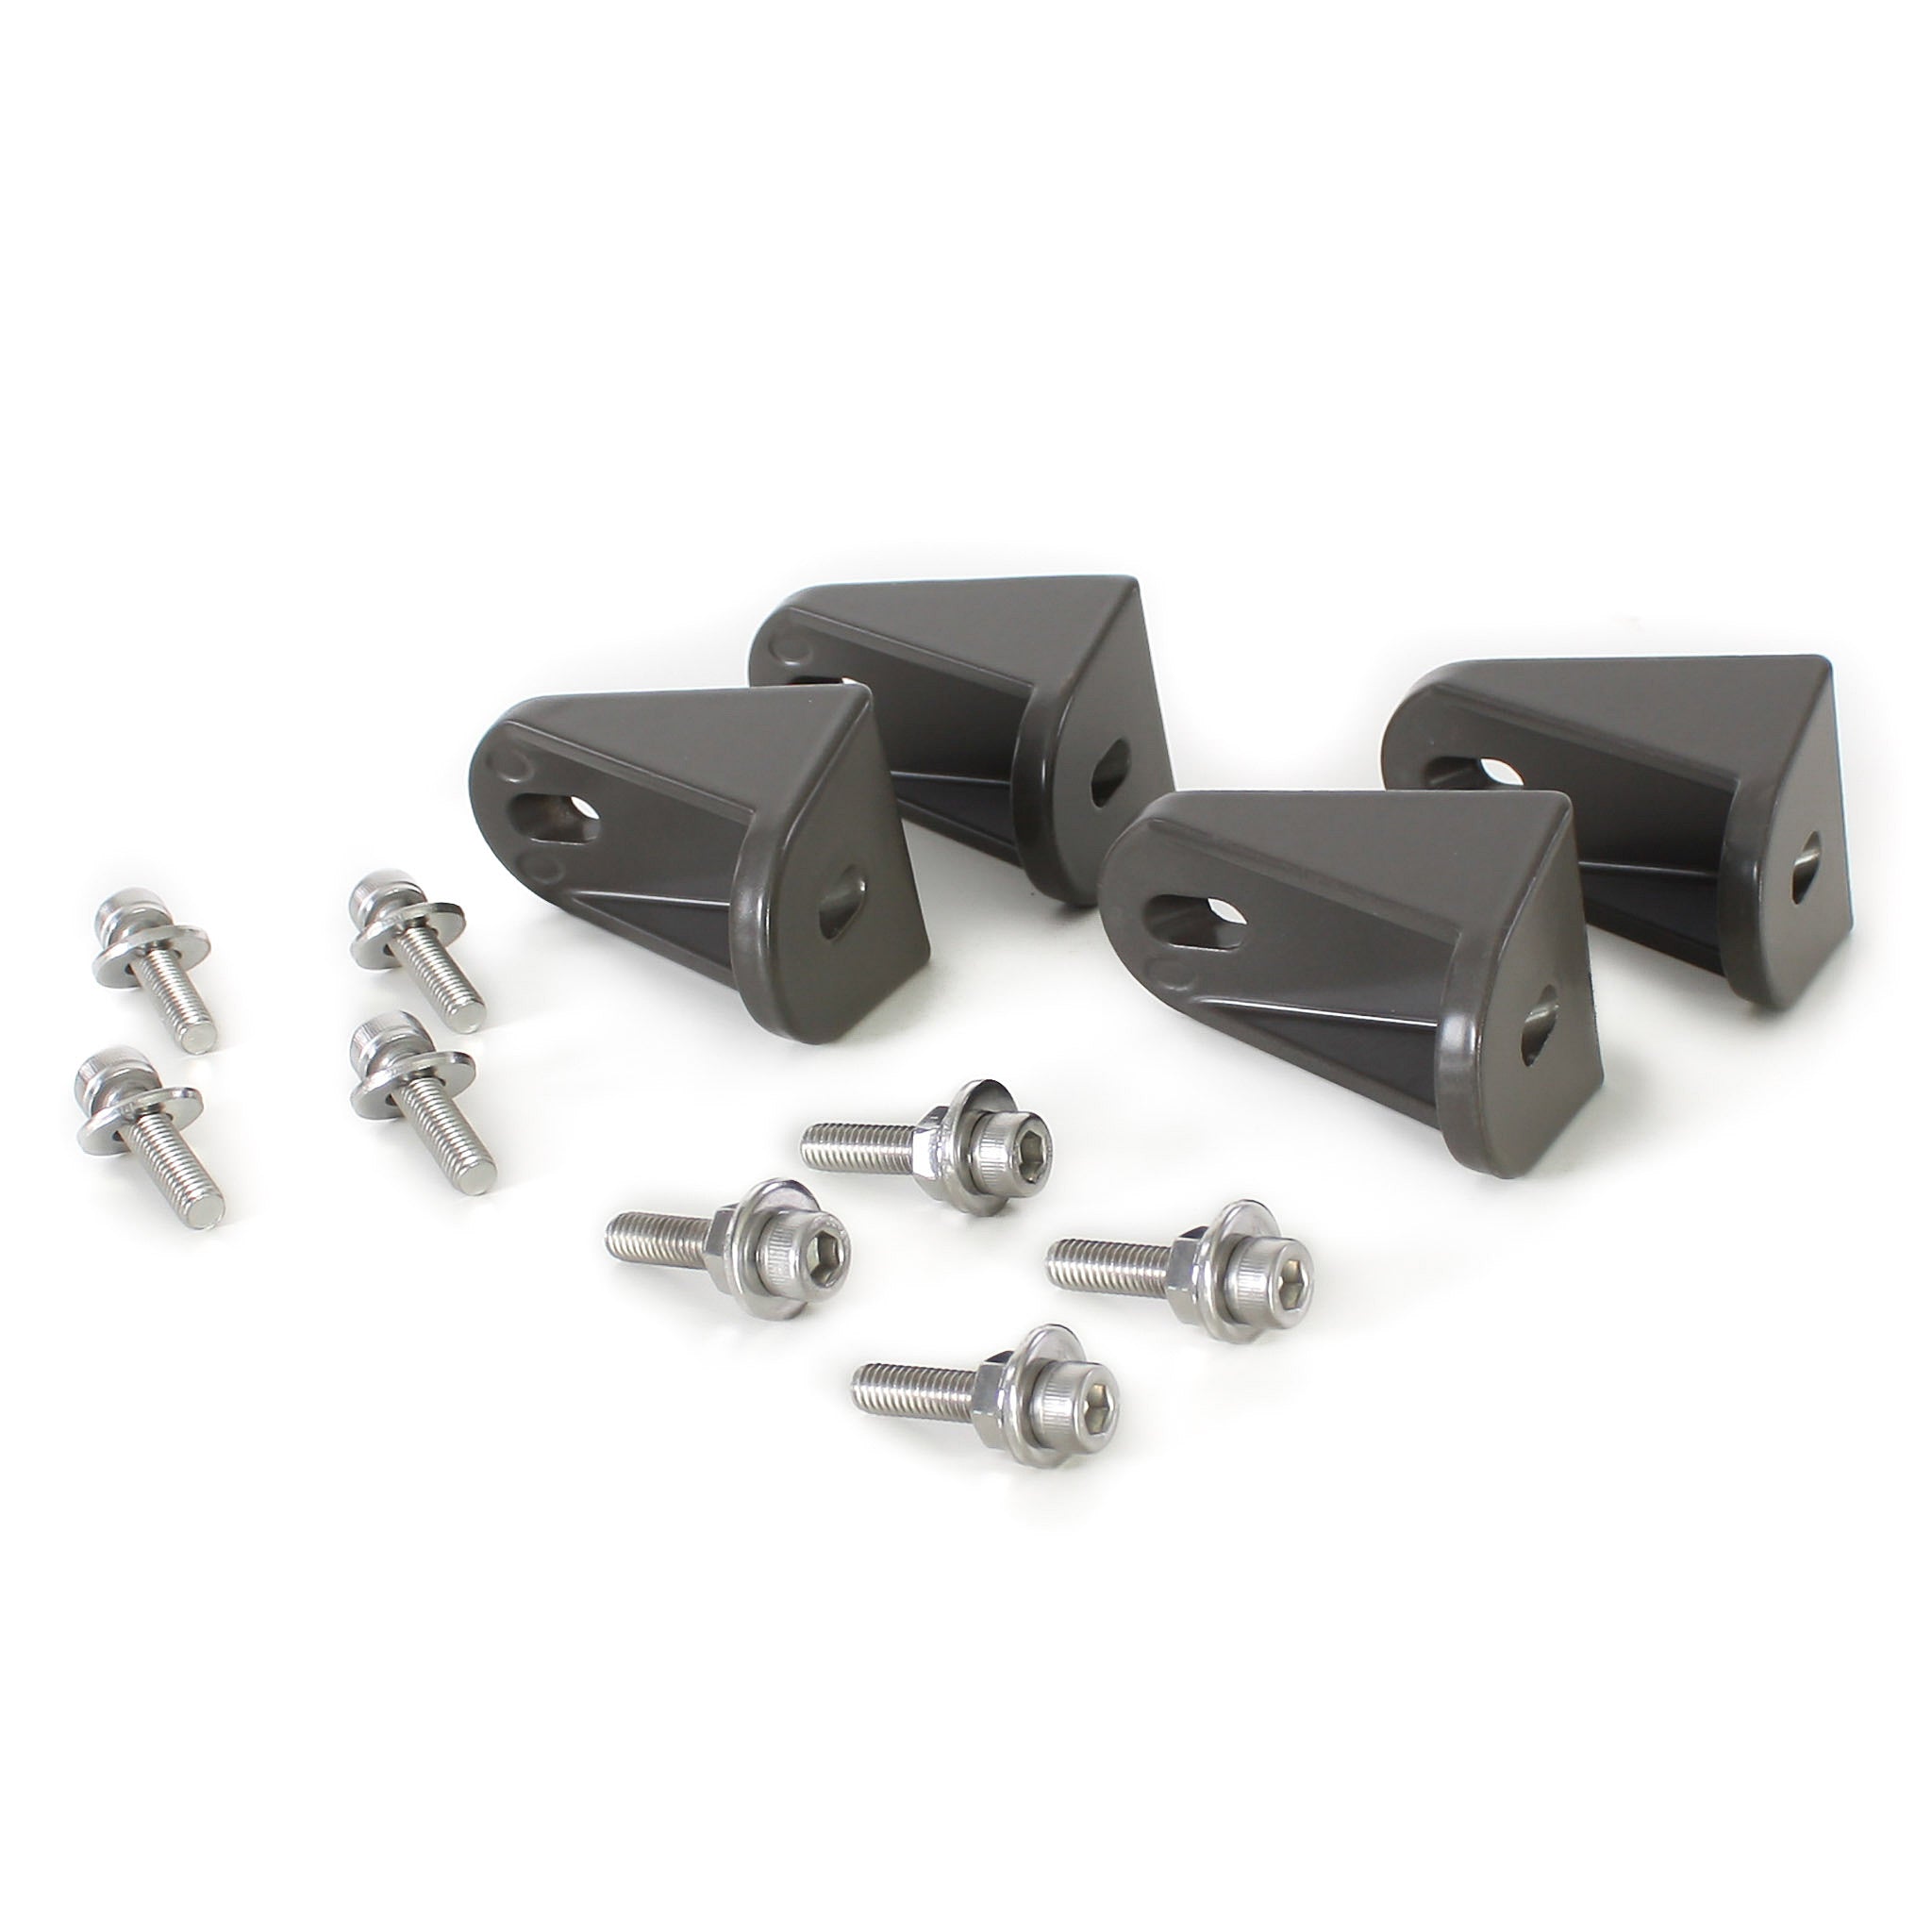 Eley aluminum post mounting brackets and hardware, Four aluminum and powder coated brackets come with stainless steel nuts and bolts